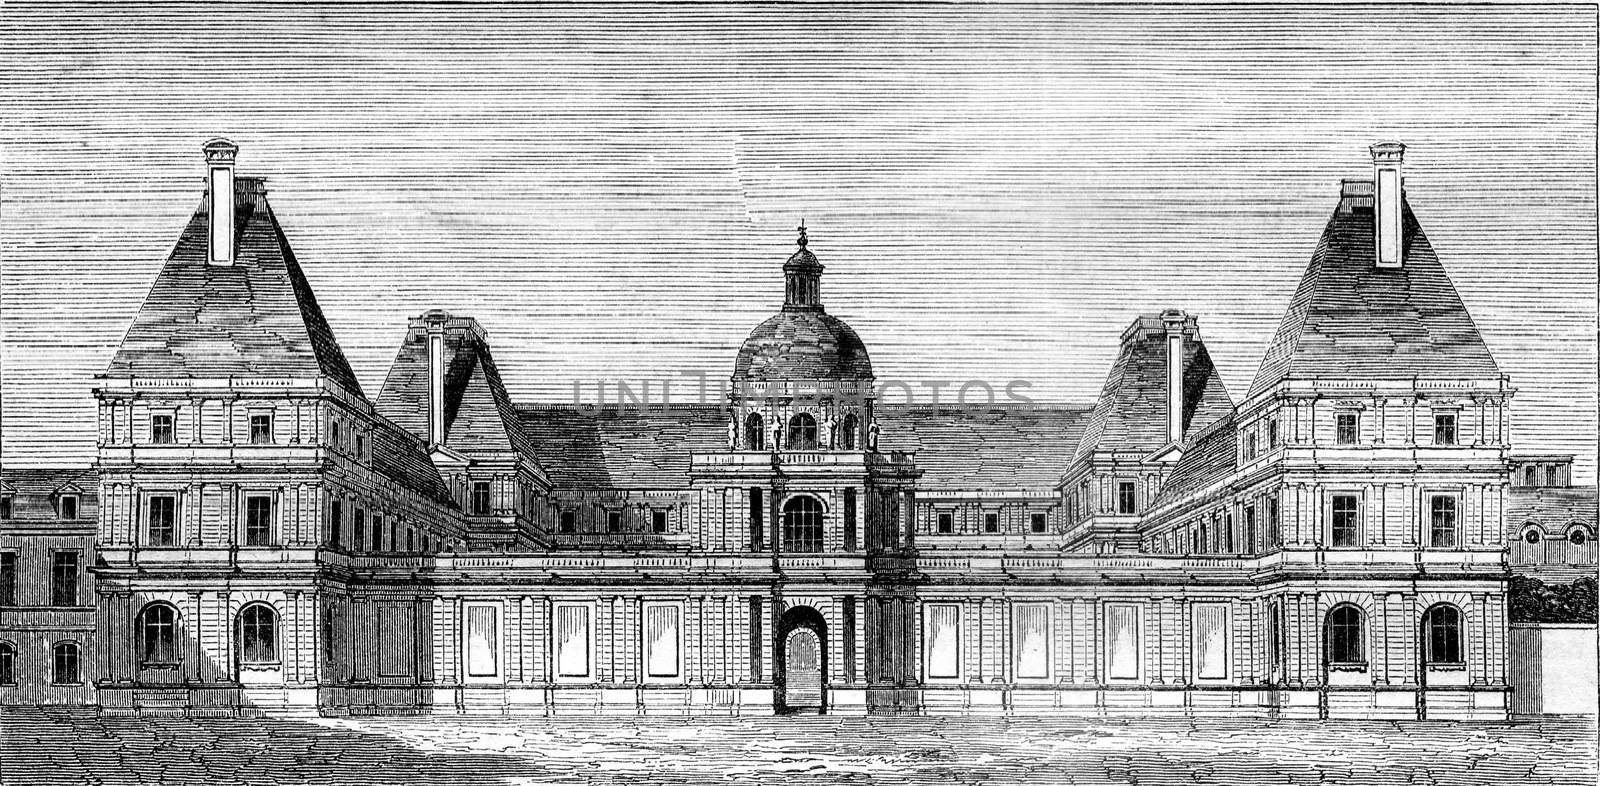 Luxembourg Palace, stand for Marie de Medici, vintage engraved illustration. Magasin Pittoresque 1845.
